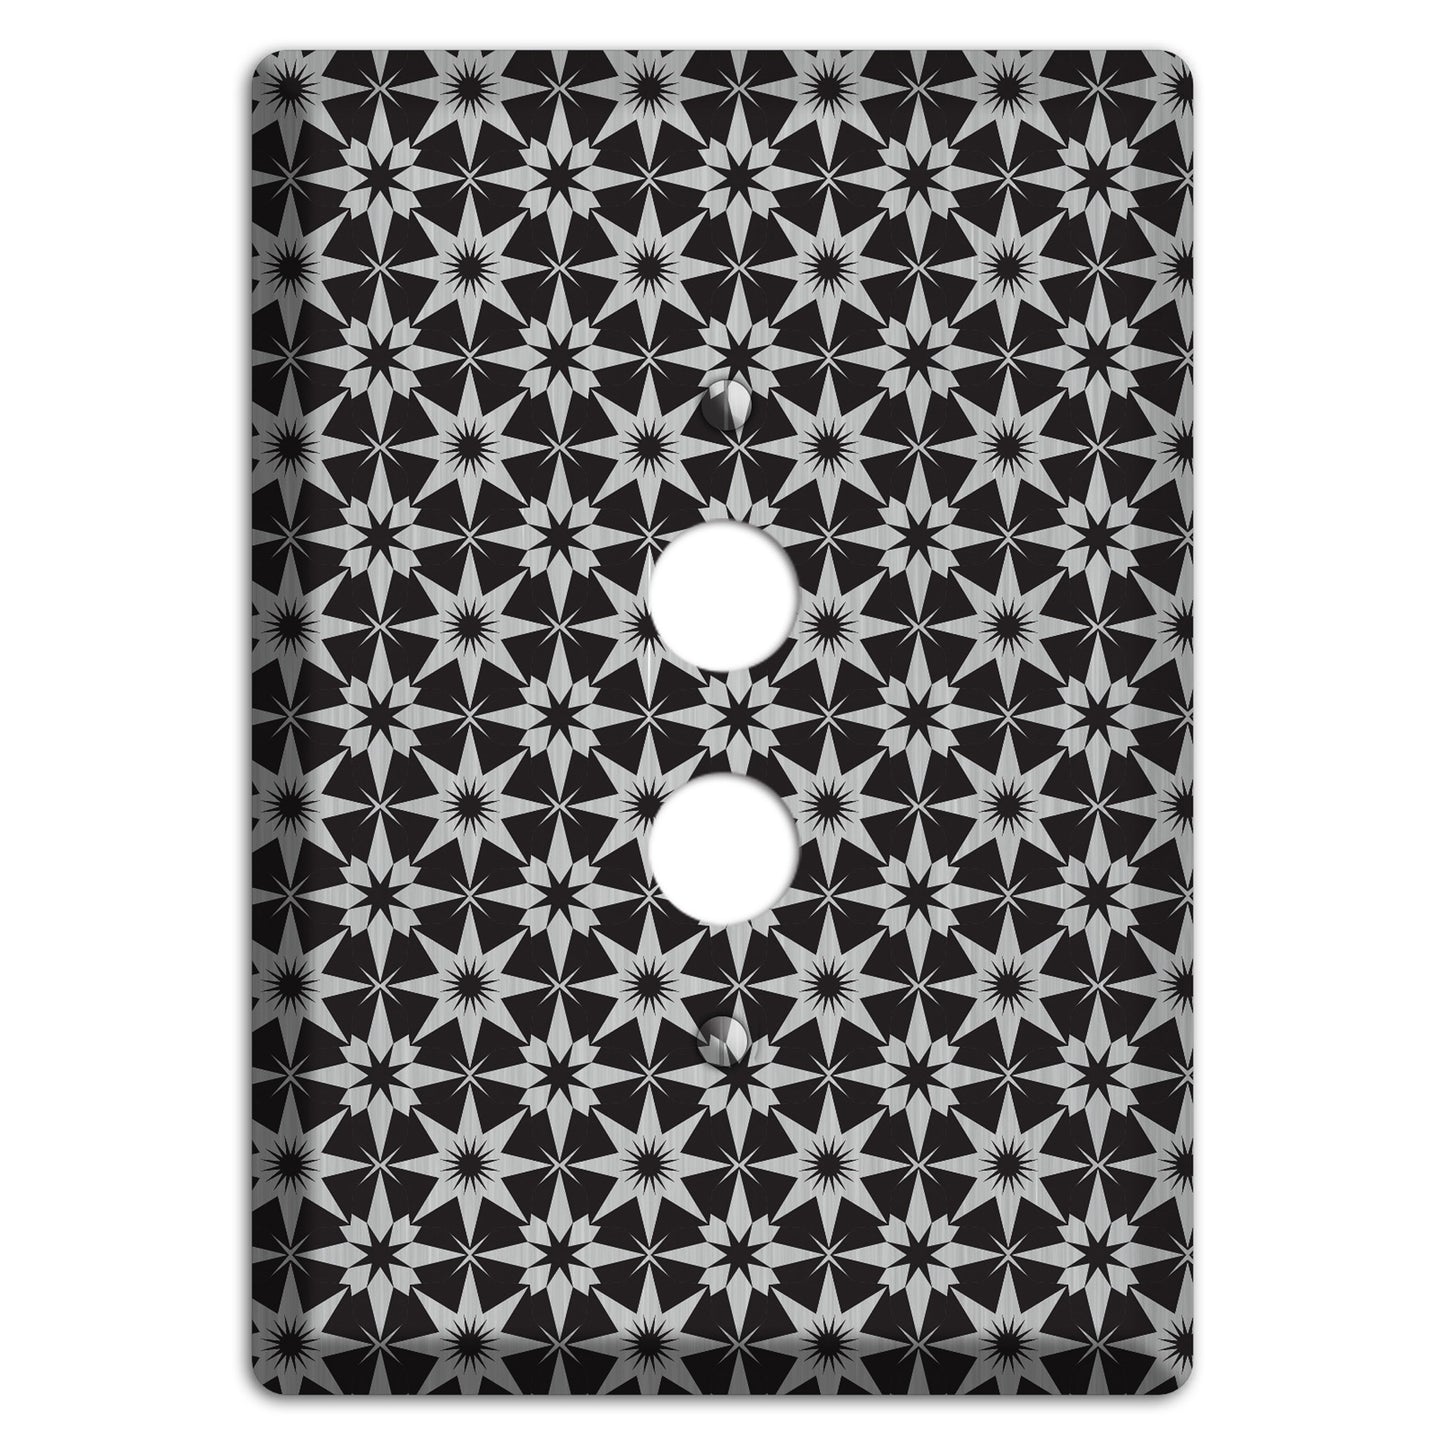 Black with Stainless Foulard 1 Pushbutton Wallplate